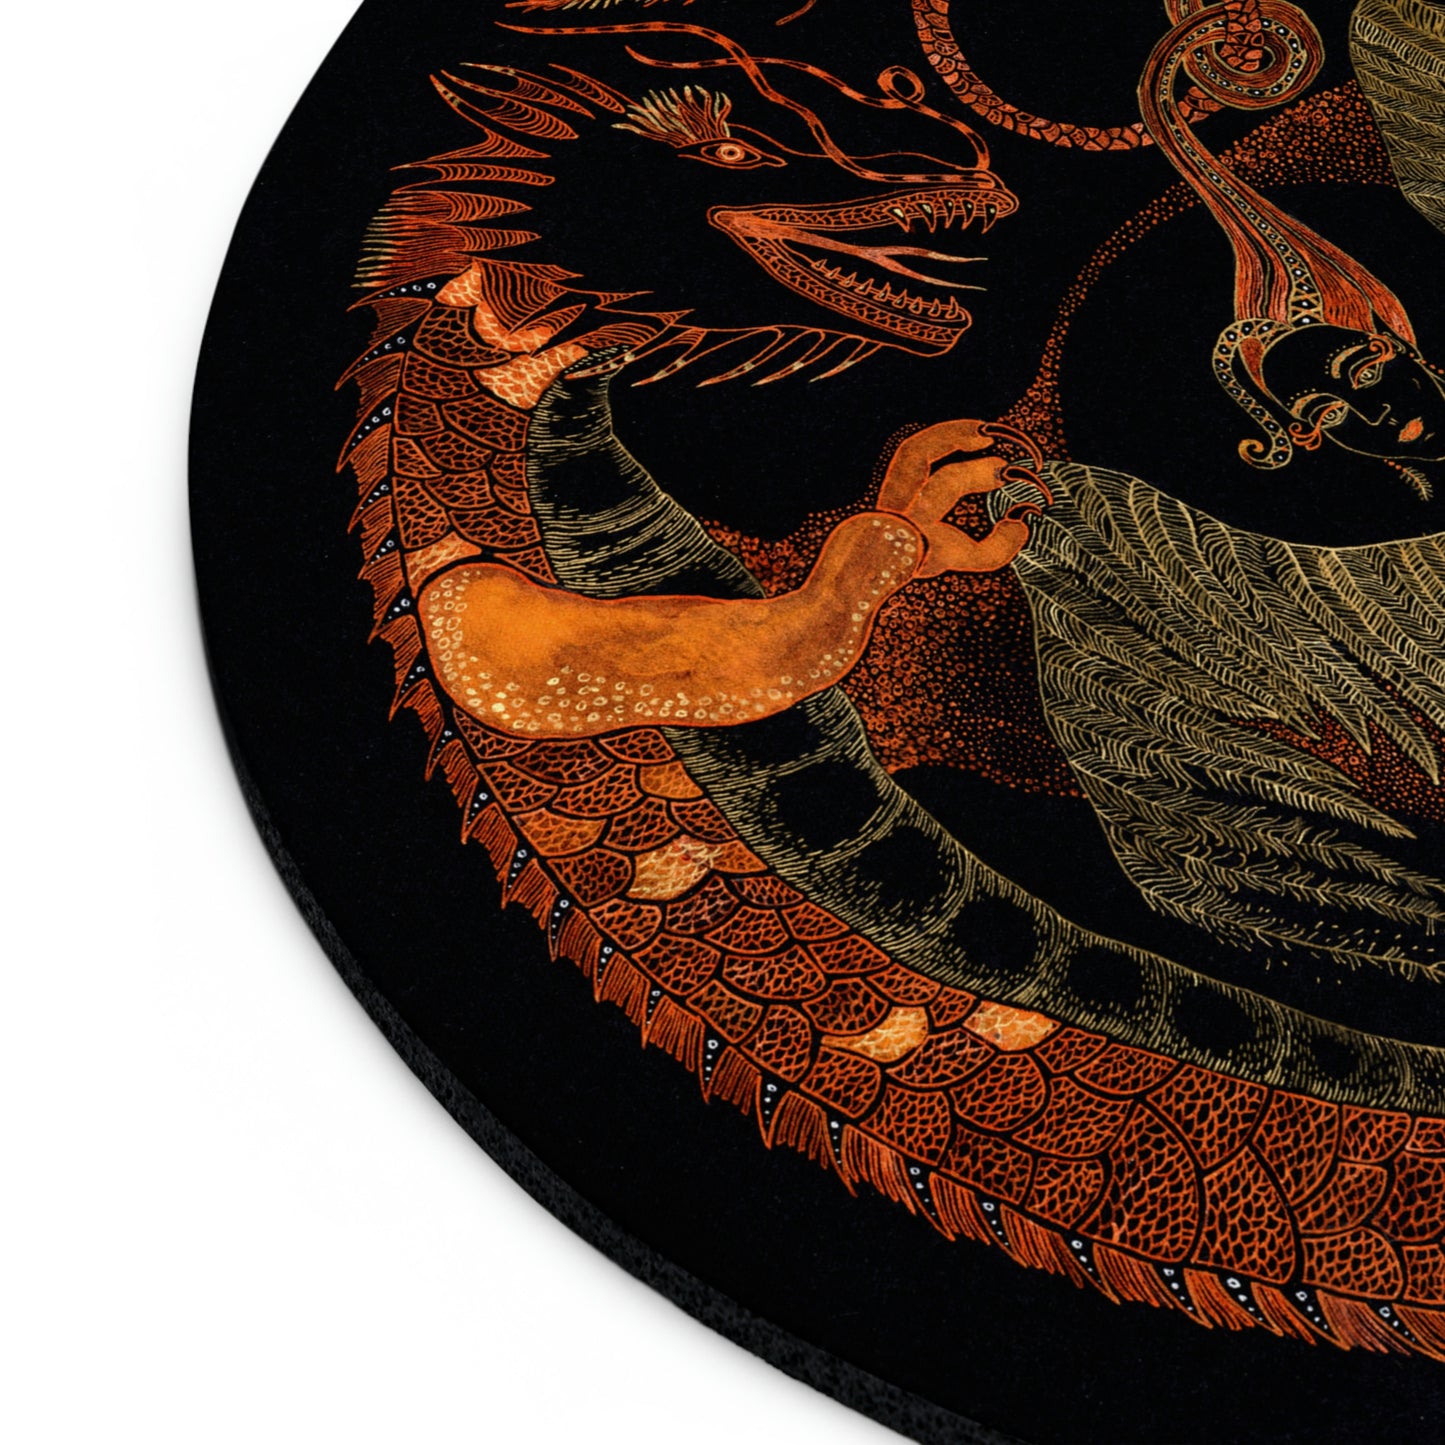 Chinese Zodiac Sign Mouse Pad (Dragon)